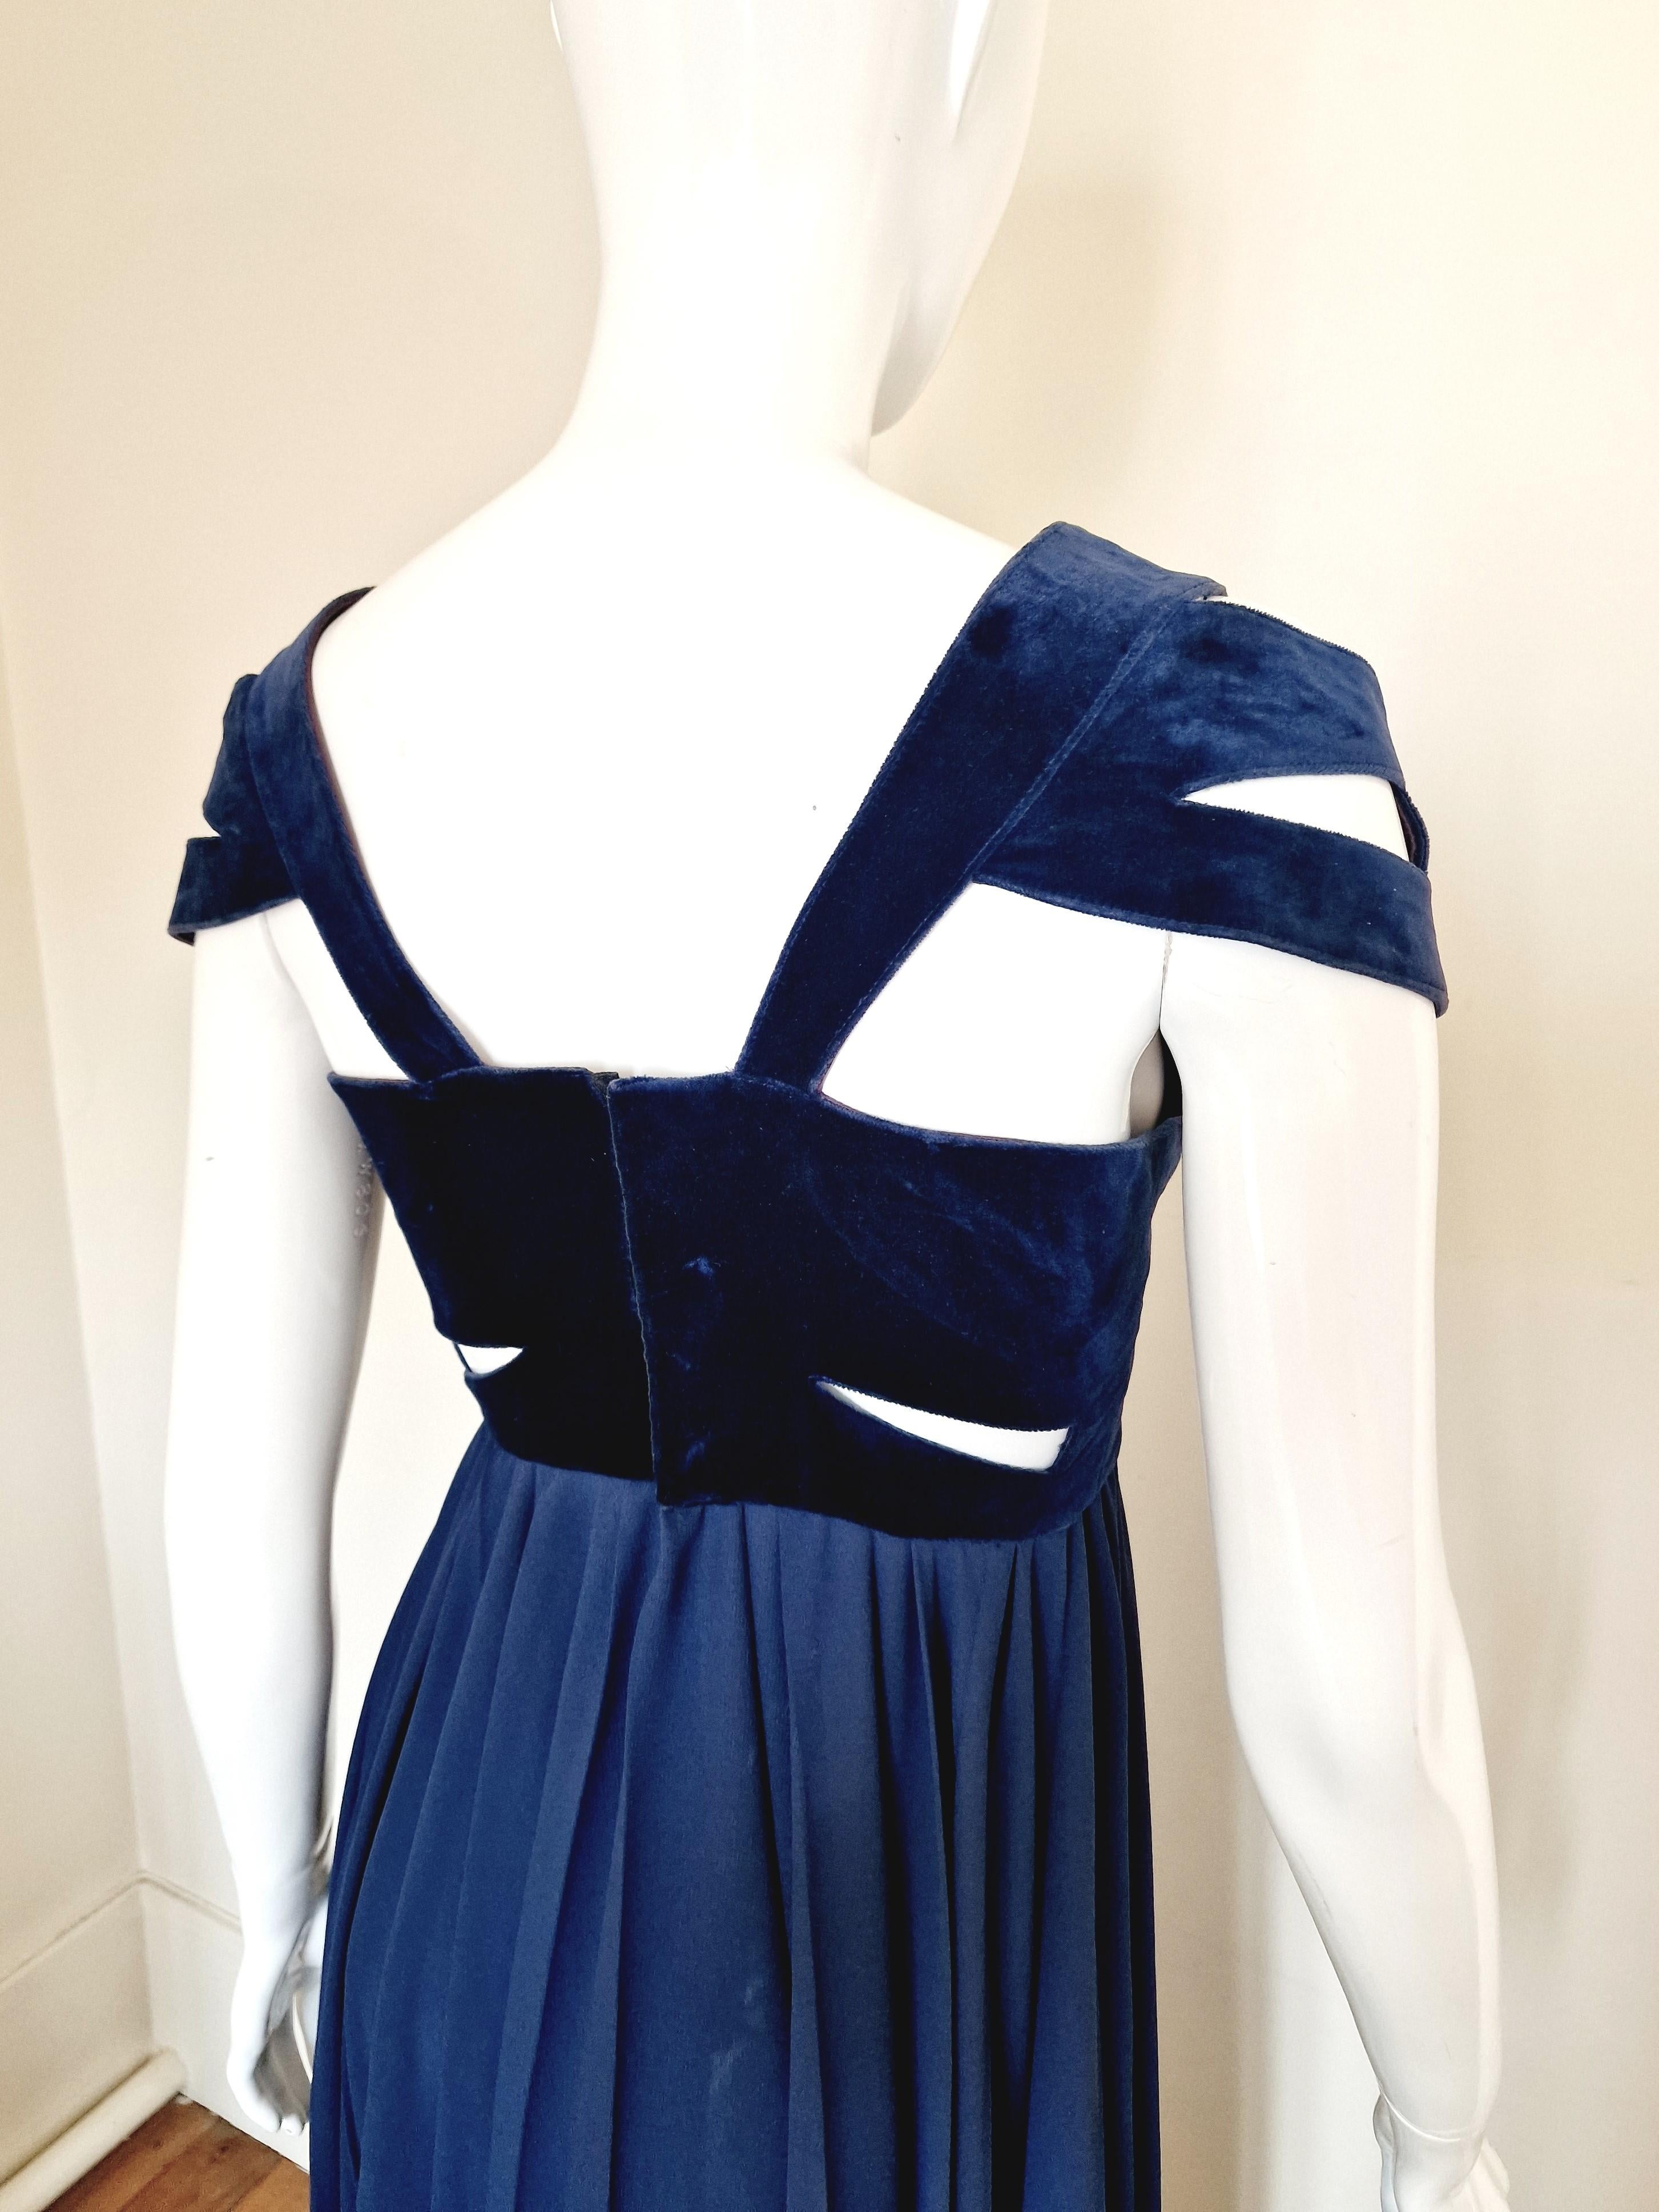 Thierry Mugler Runway 1992 S/S Cut-Out Demi Moore Blue Evening Maxi Dress Gown For Sale 9